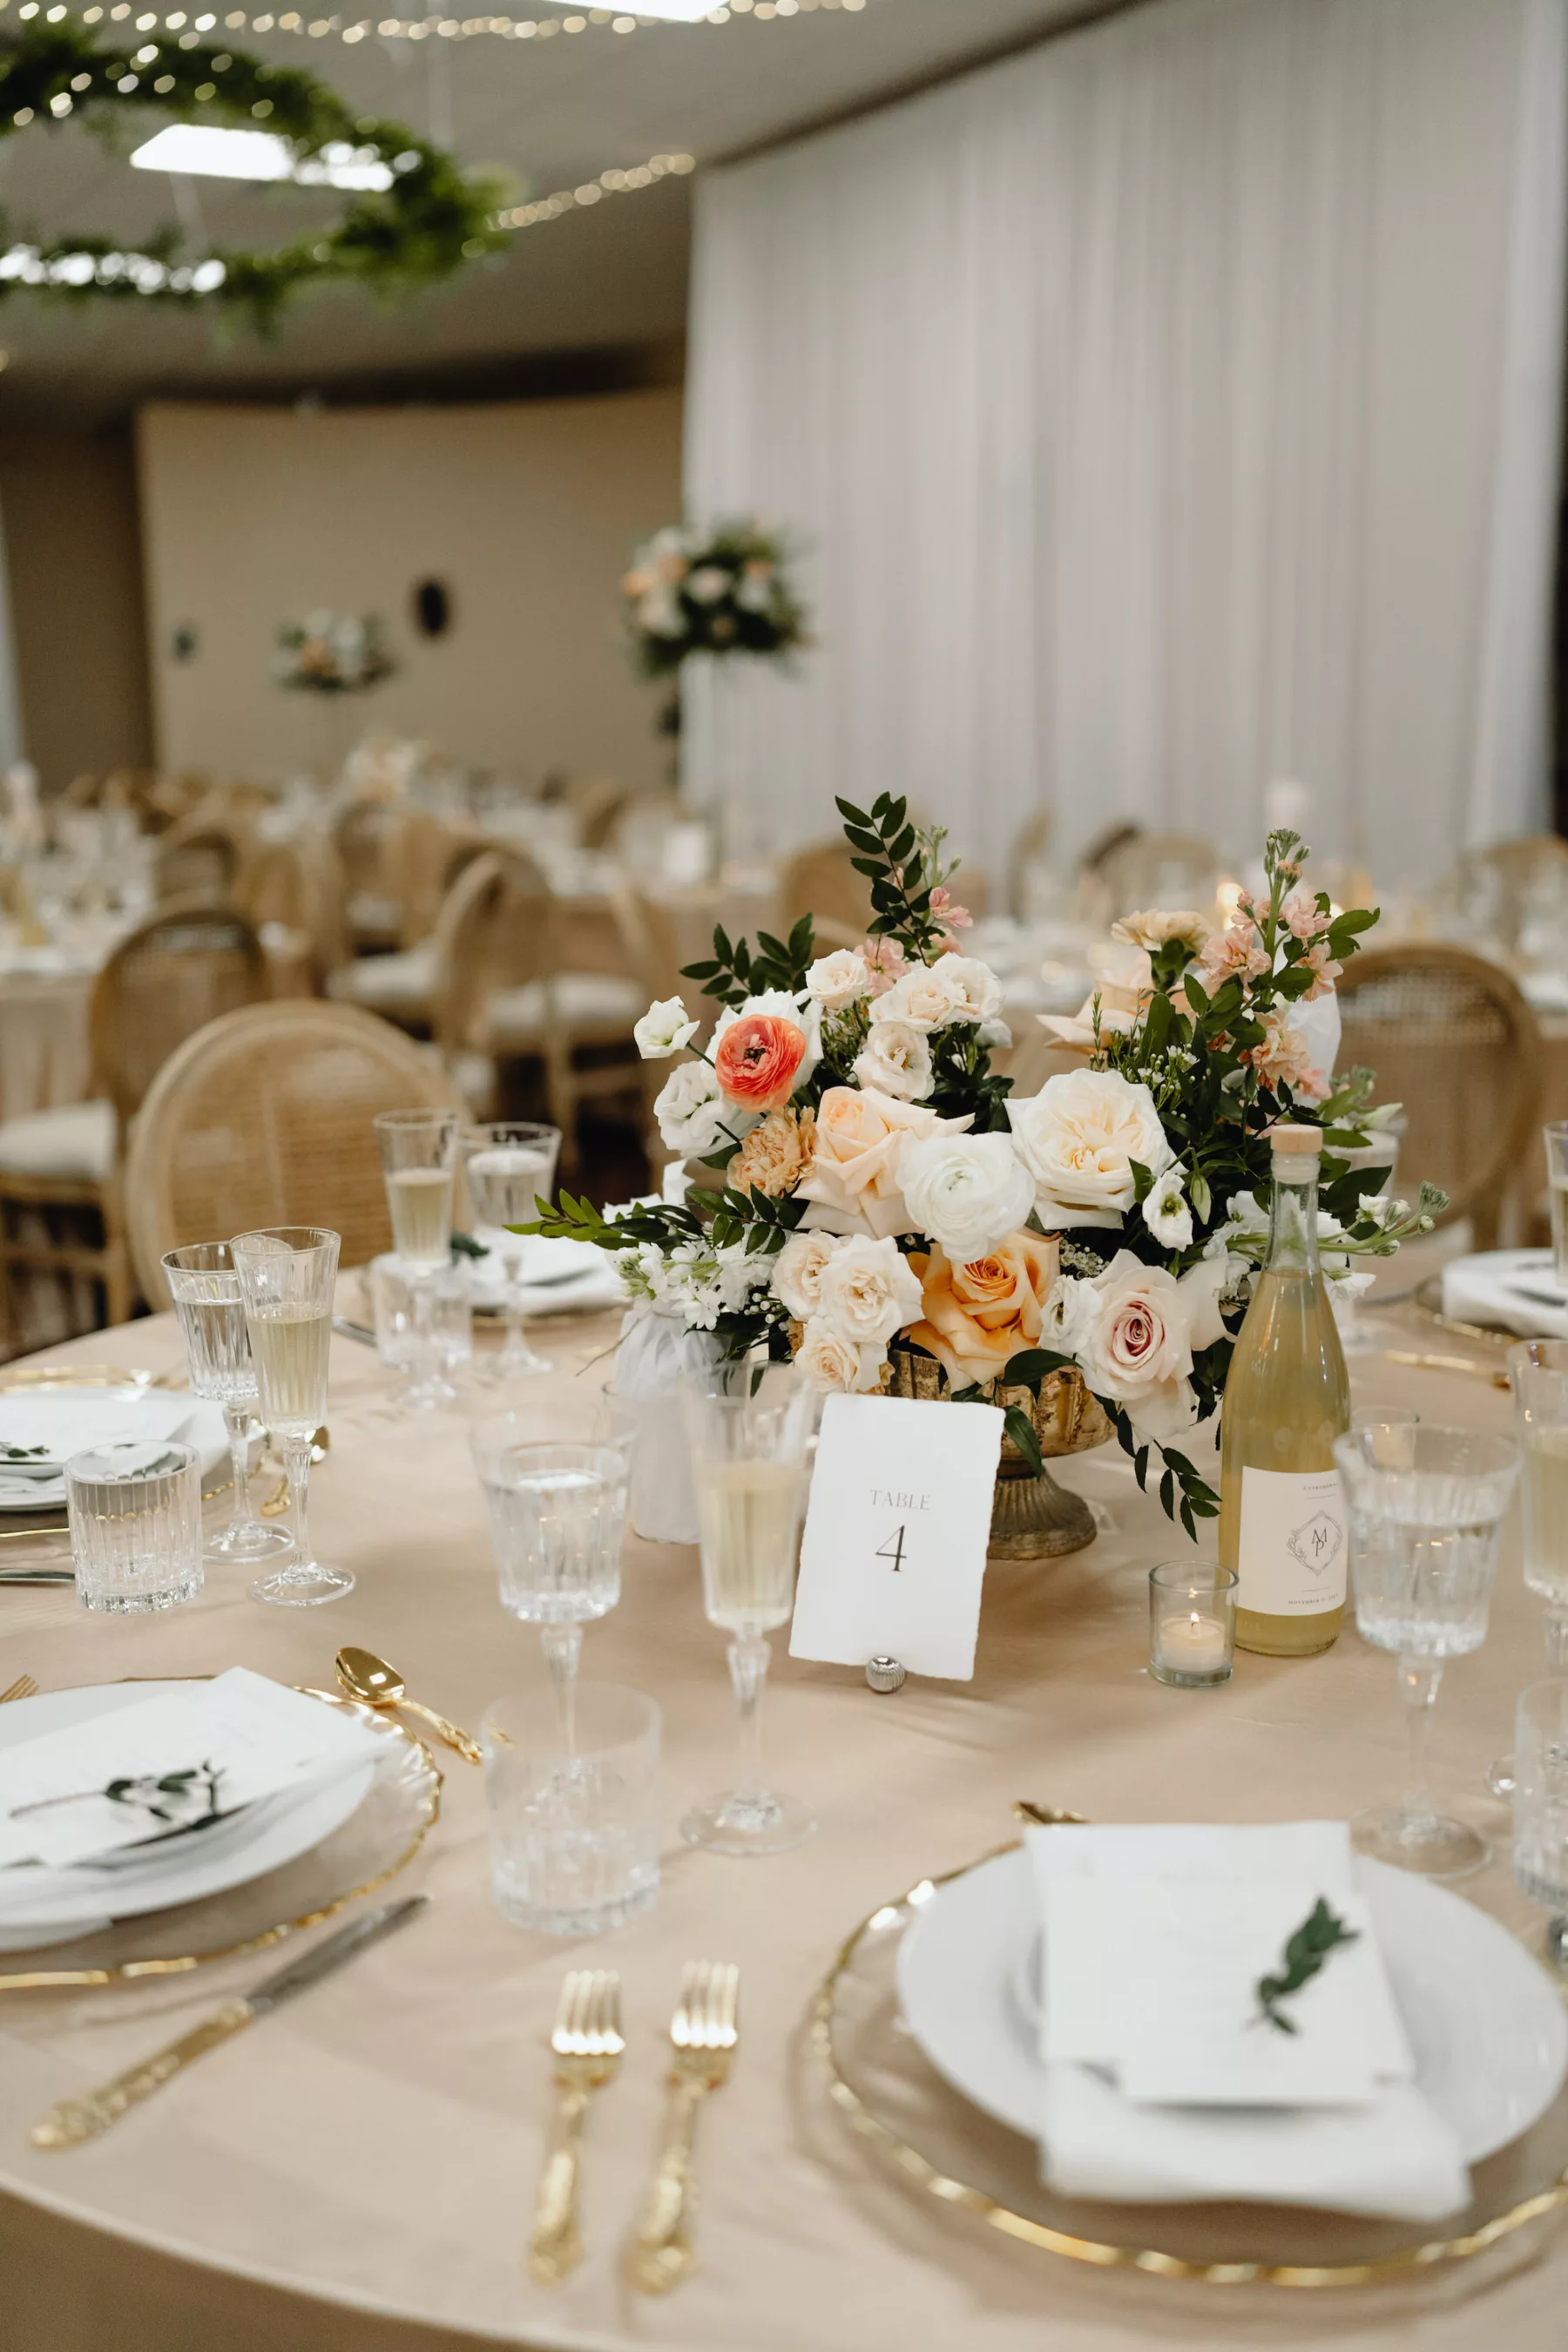 Classic Italian Inspired White and Champagne Fall Wedding Reception Place Setting Tablescape Ideas | Tampa Bay Kate Ryan Event Rentals